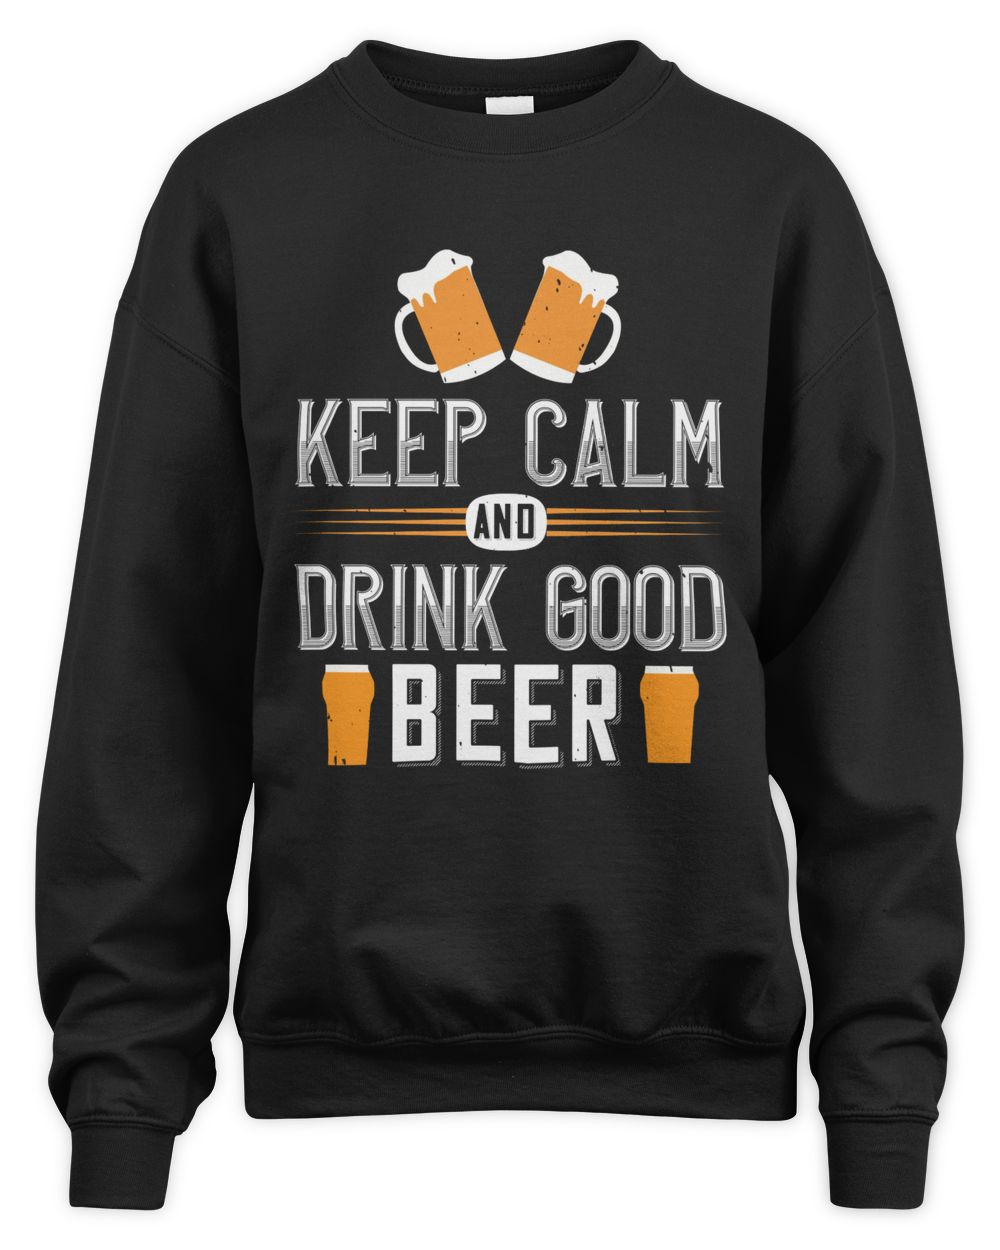 Keep Calm And Drink Good Beer Beer Shirt For Beer Lover With Free Shipping, Great Gift For Fathers Day Unisex Sweatshirt black 